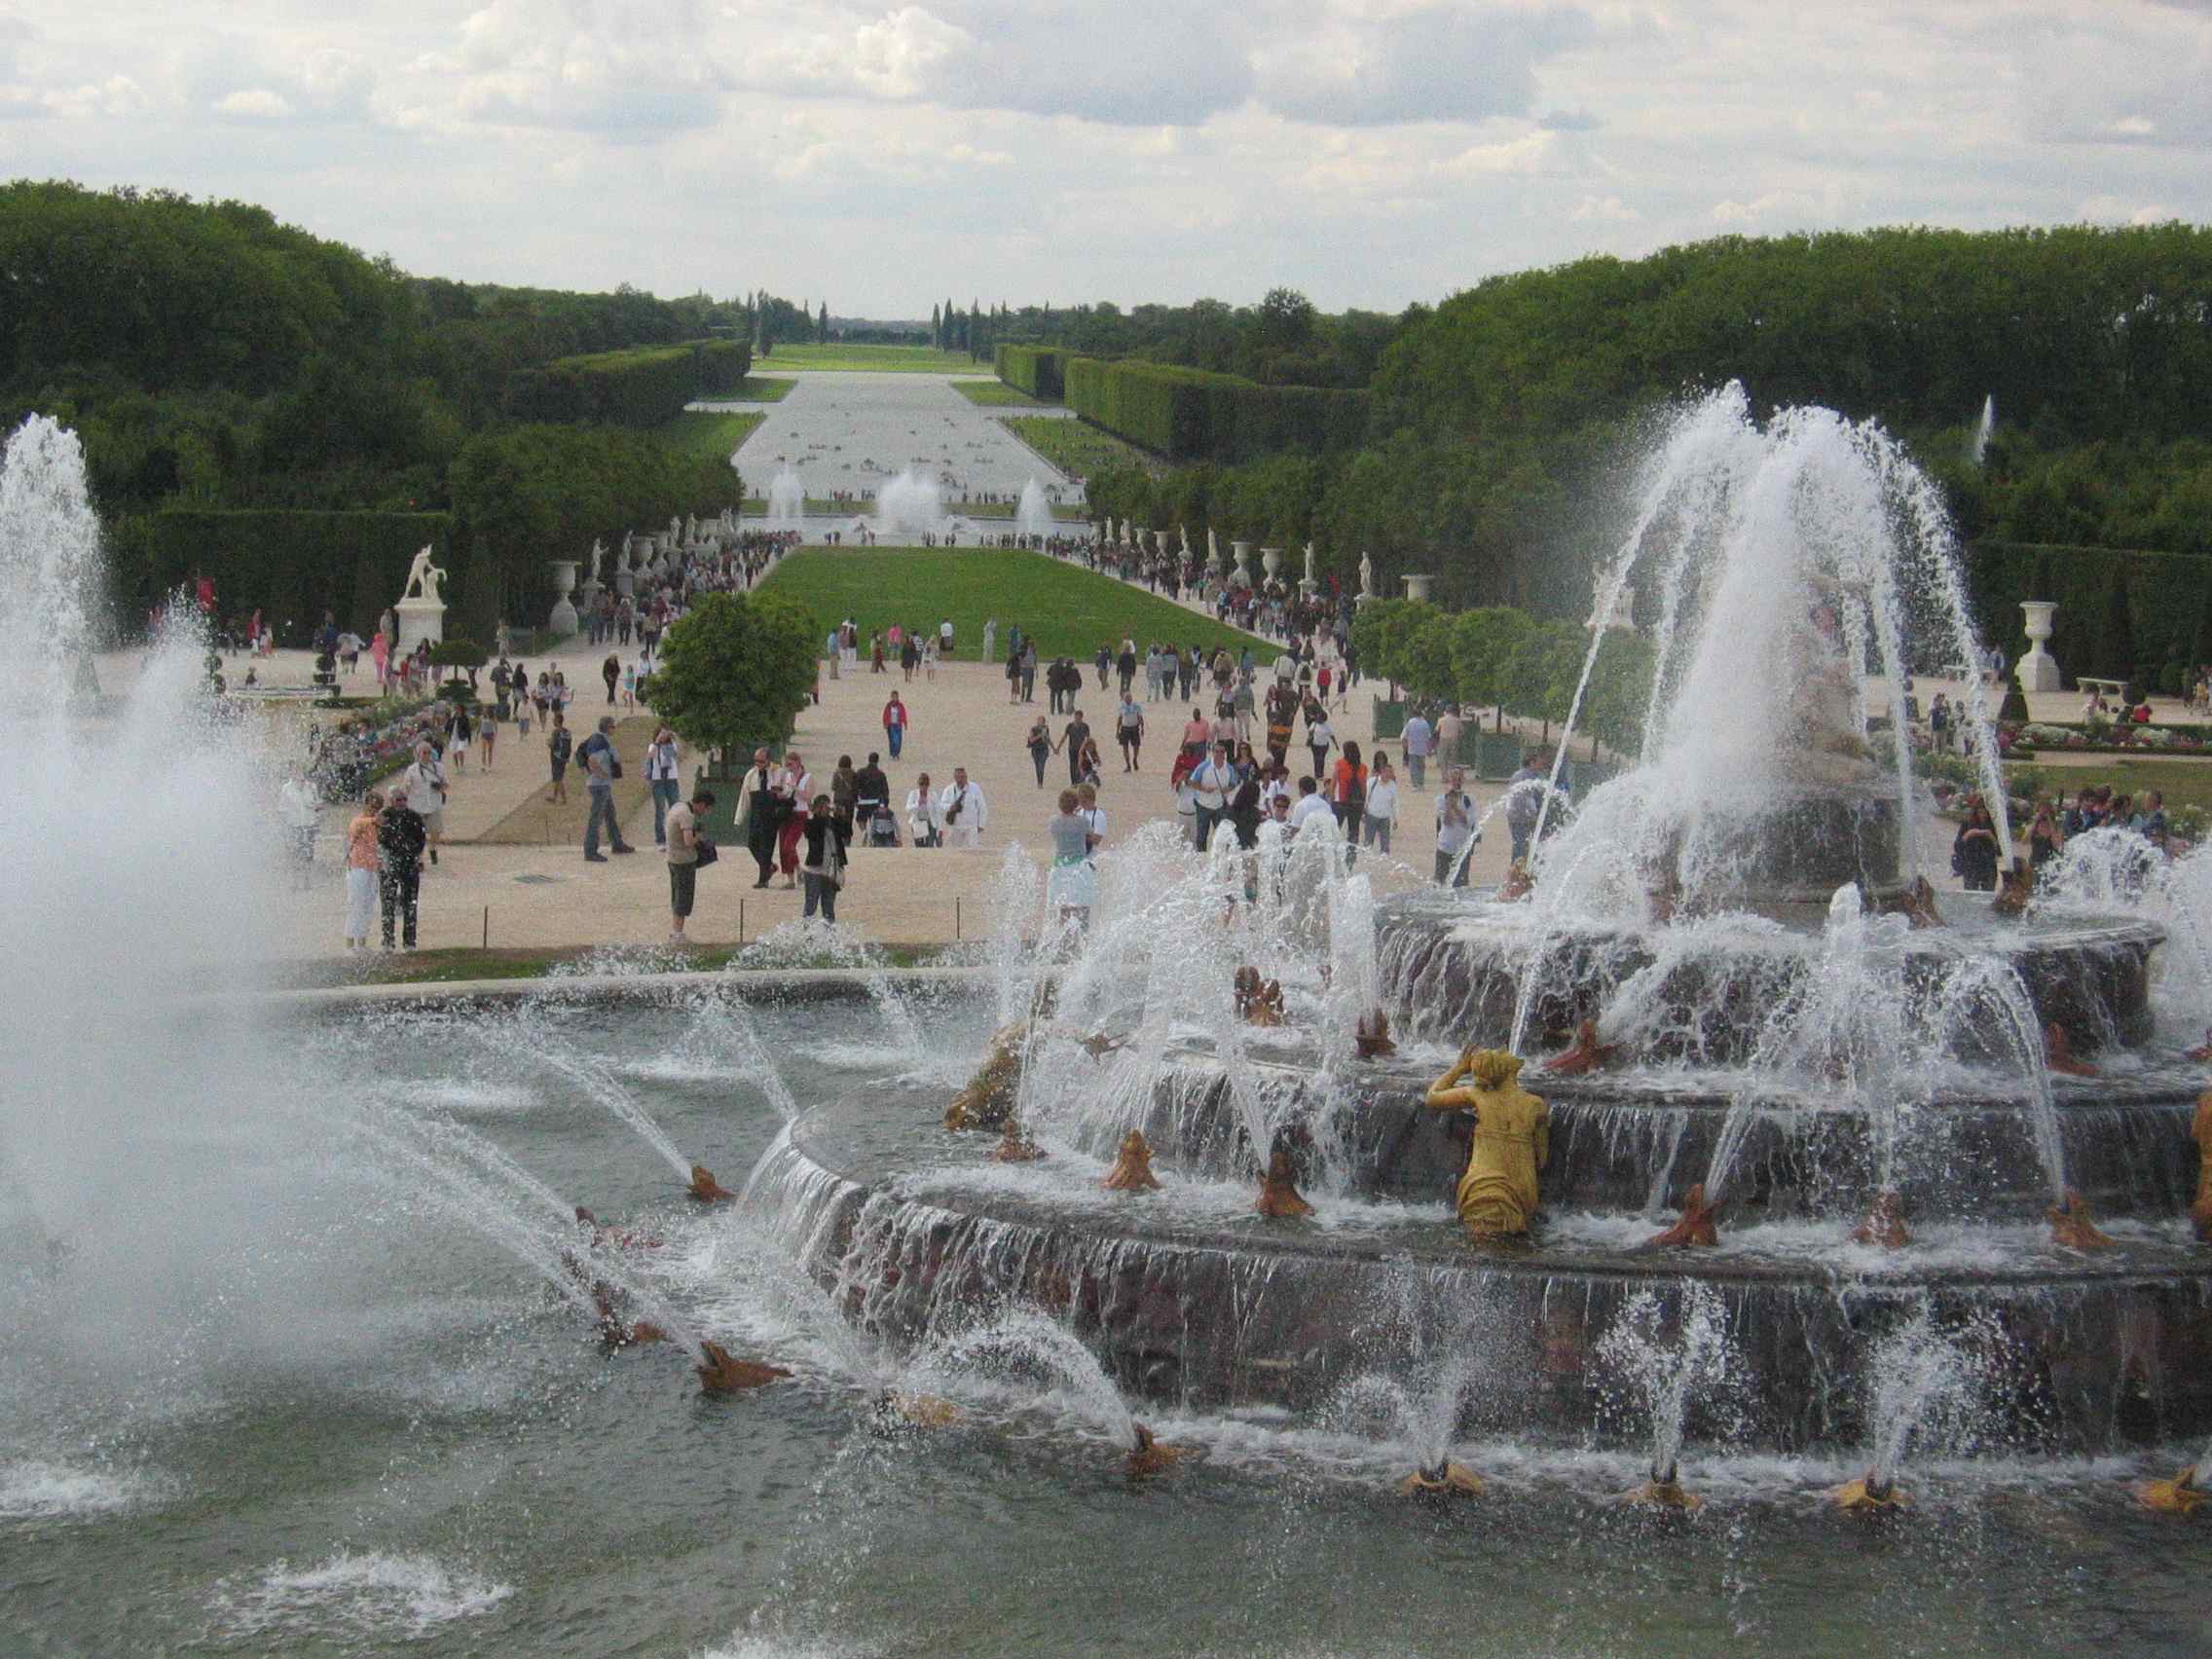 View-to-the-Grand-Canal-Gardens-of-Chateau-de-Versailles-Palace-of-Versailles-France-travel